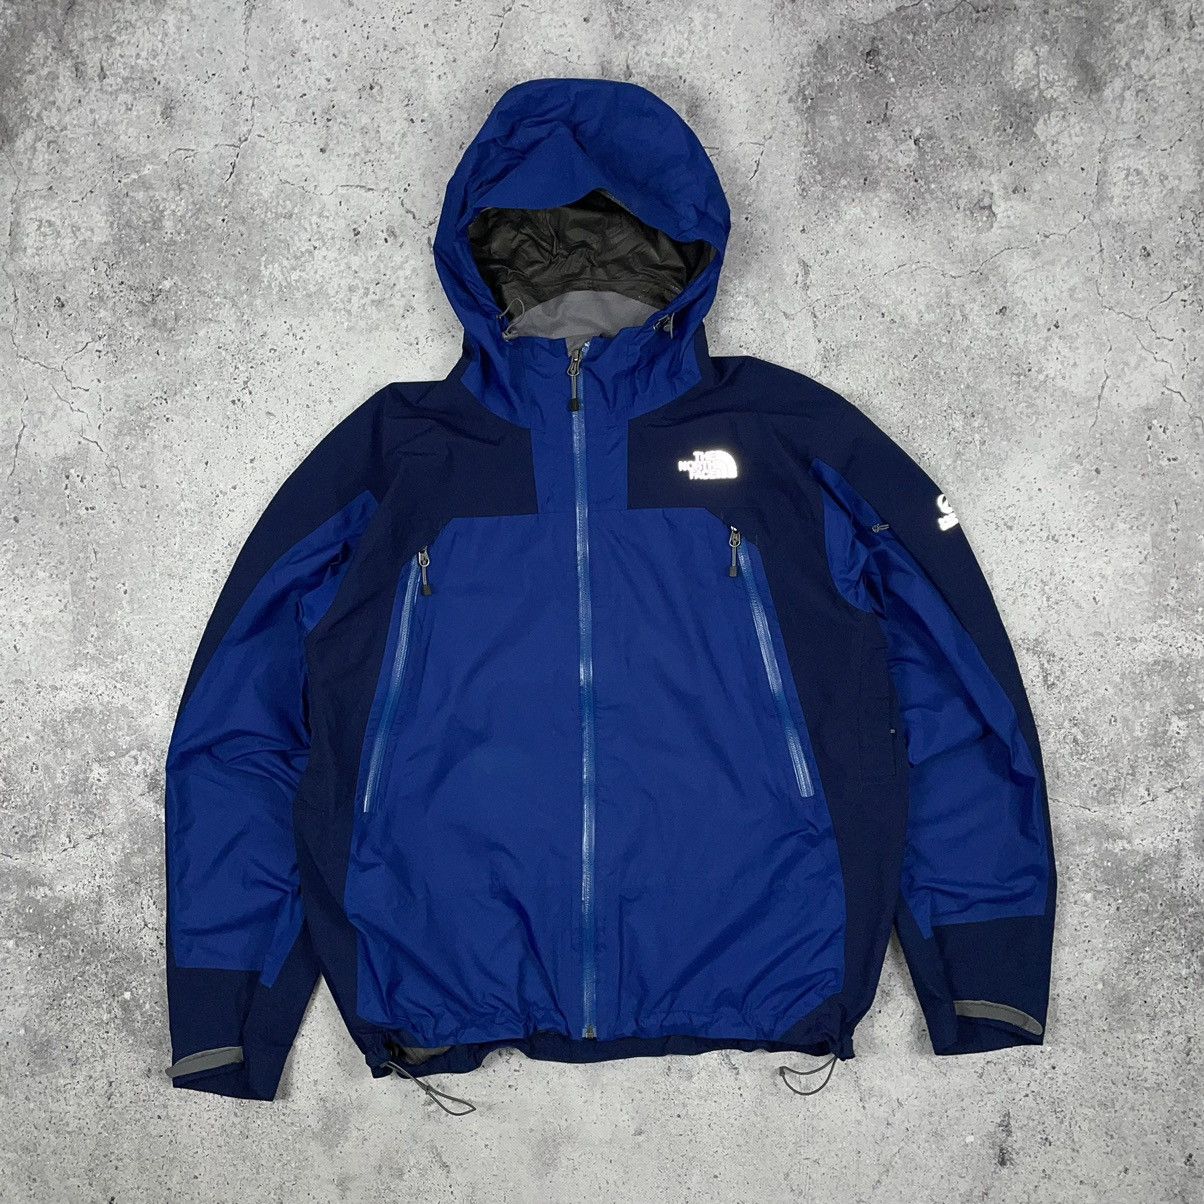 Vintage The North Face Flight Series Gore-Tex Gorcope Jacket | Grailed